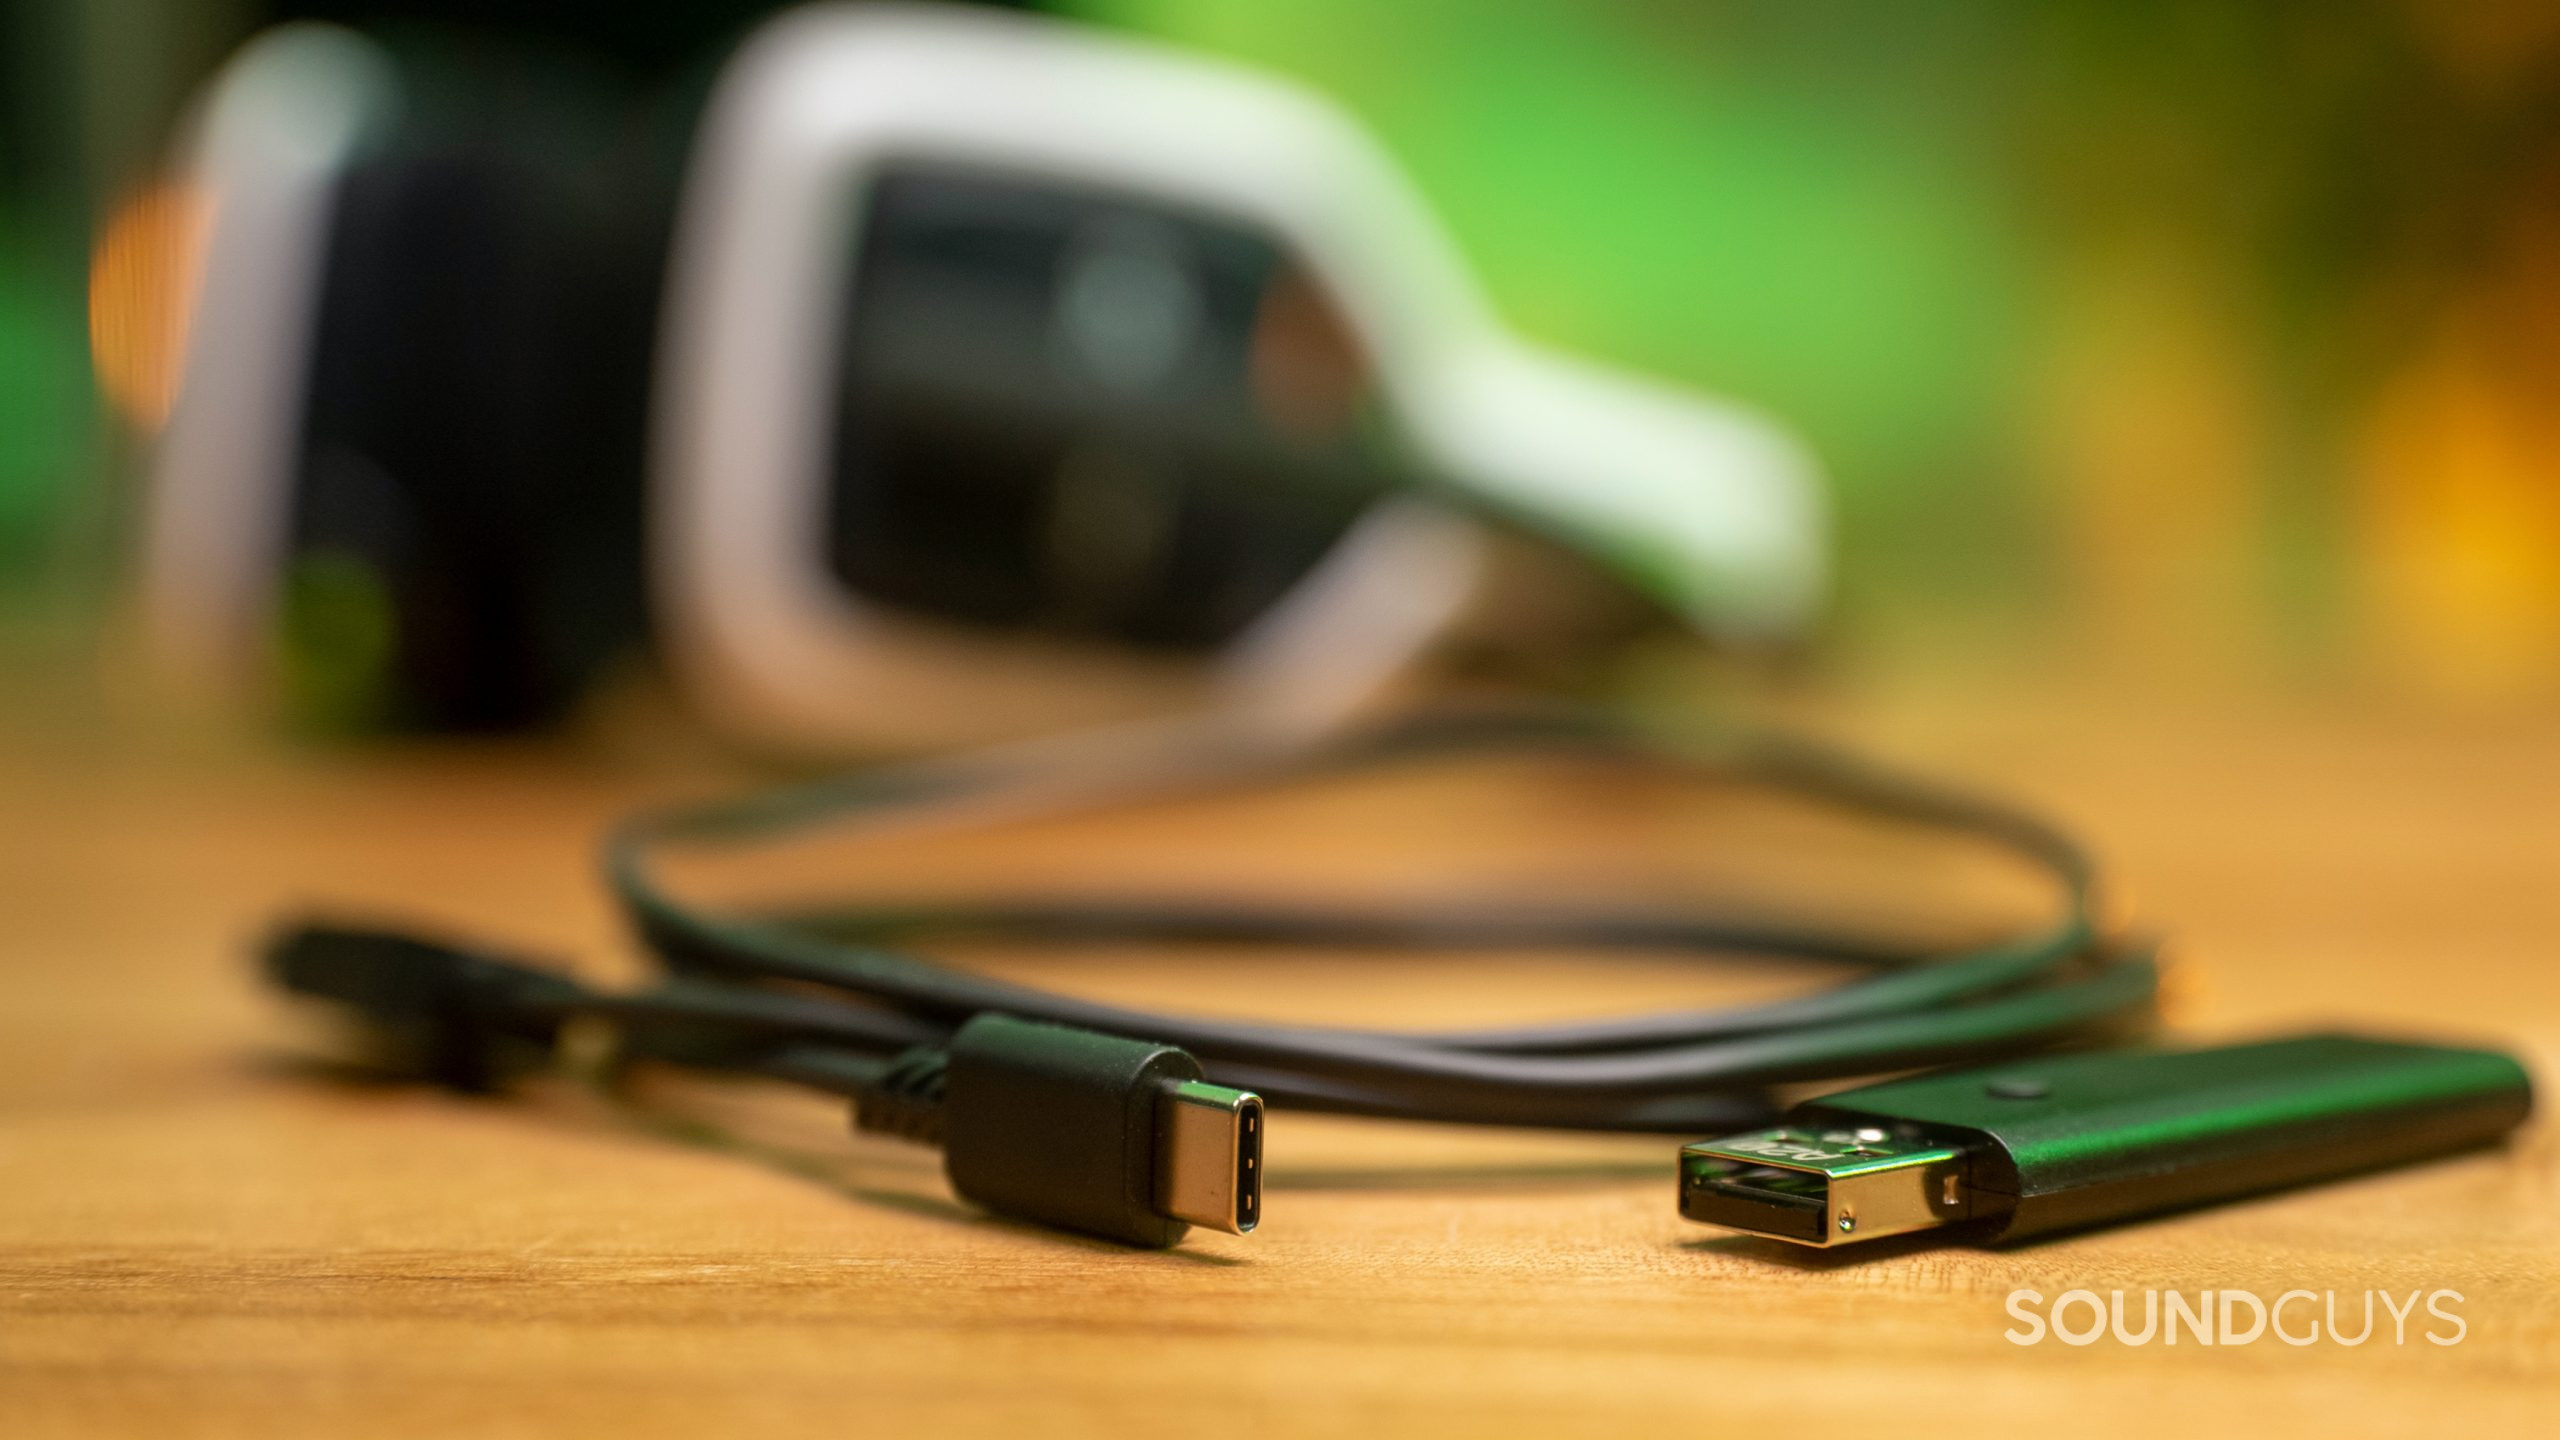 The wireless dongle for the Astro A20 lays in the foreground, with the headset behind it.